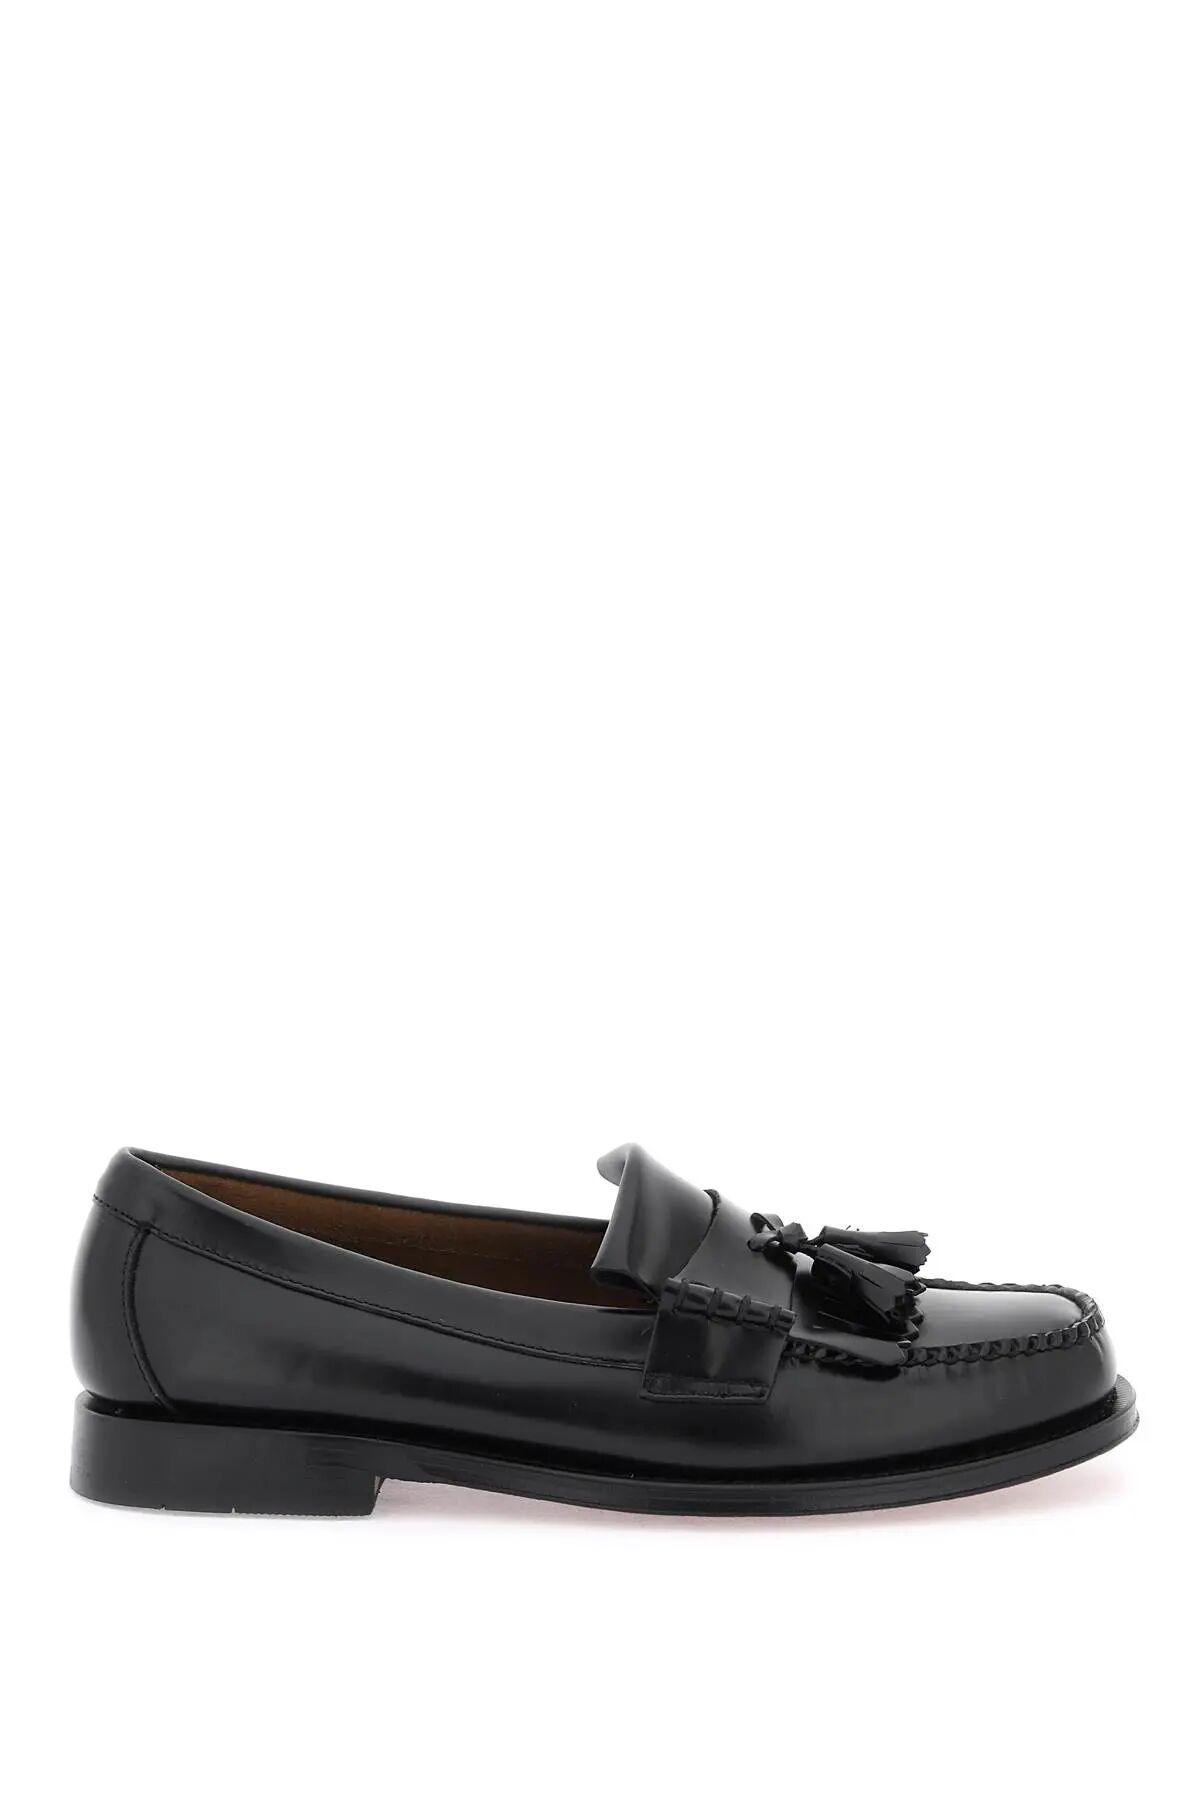 G.H. BASS Esther Kiltie Weejuns loafers  - Black - male - Size: 43